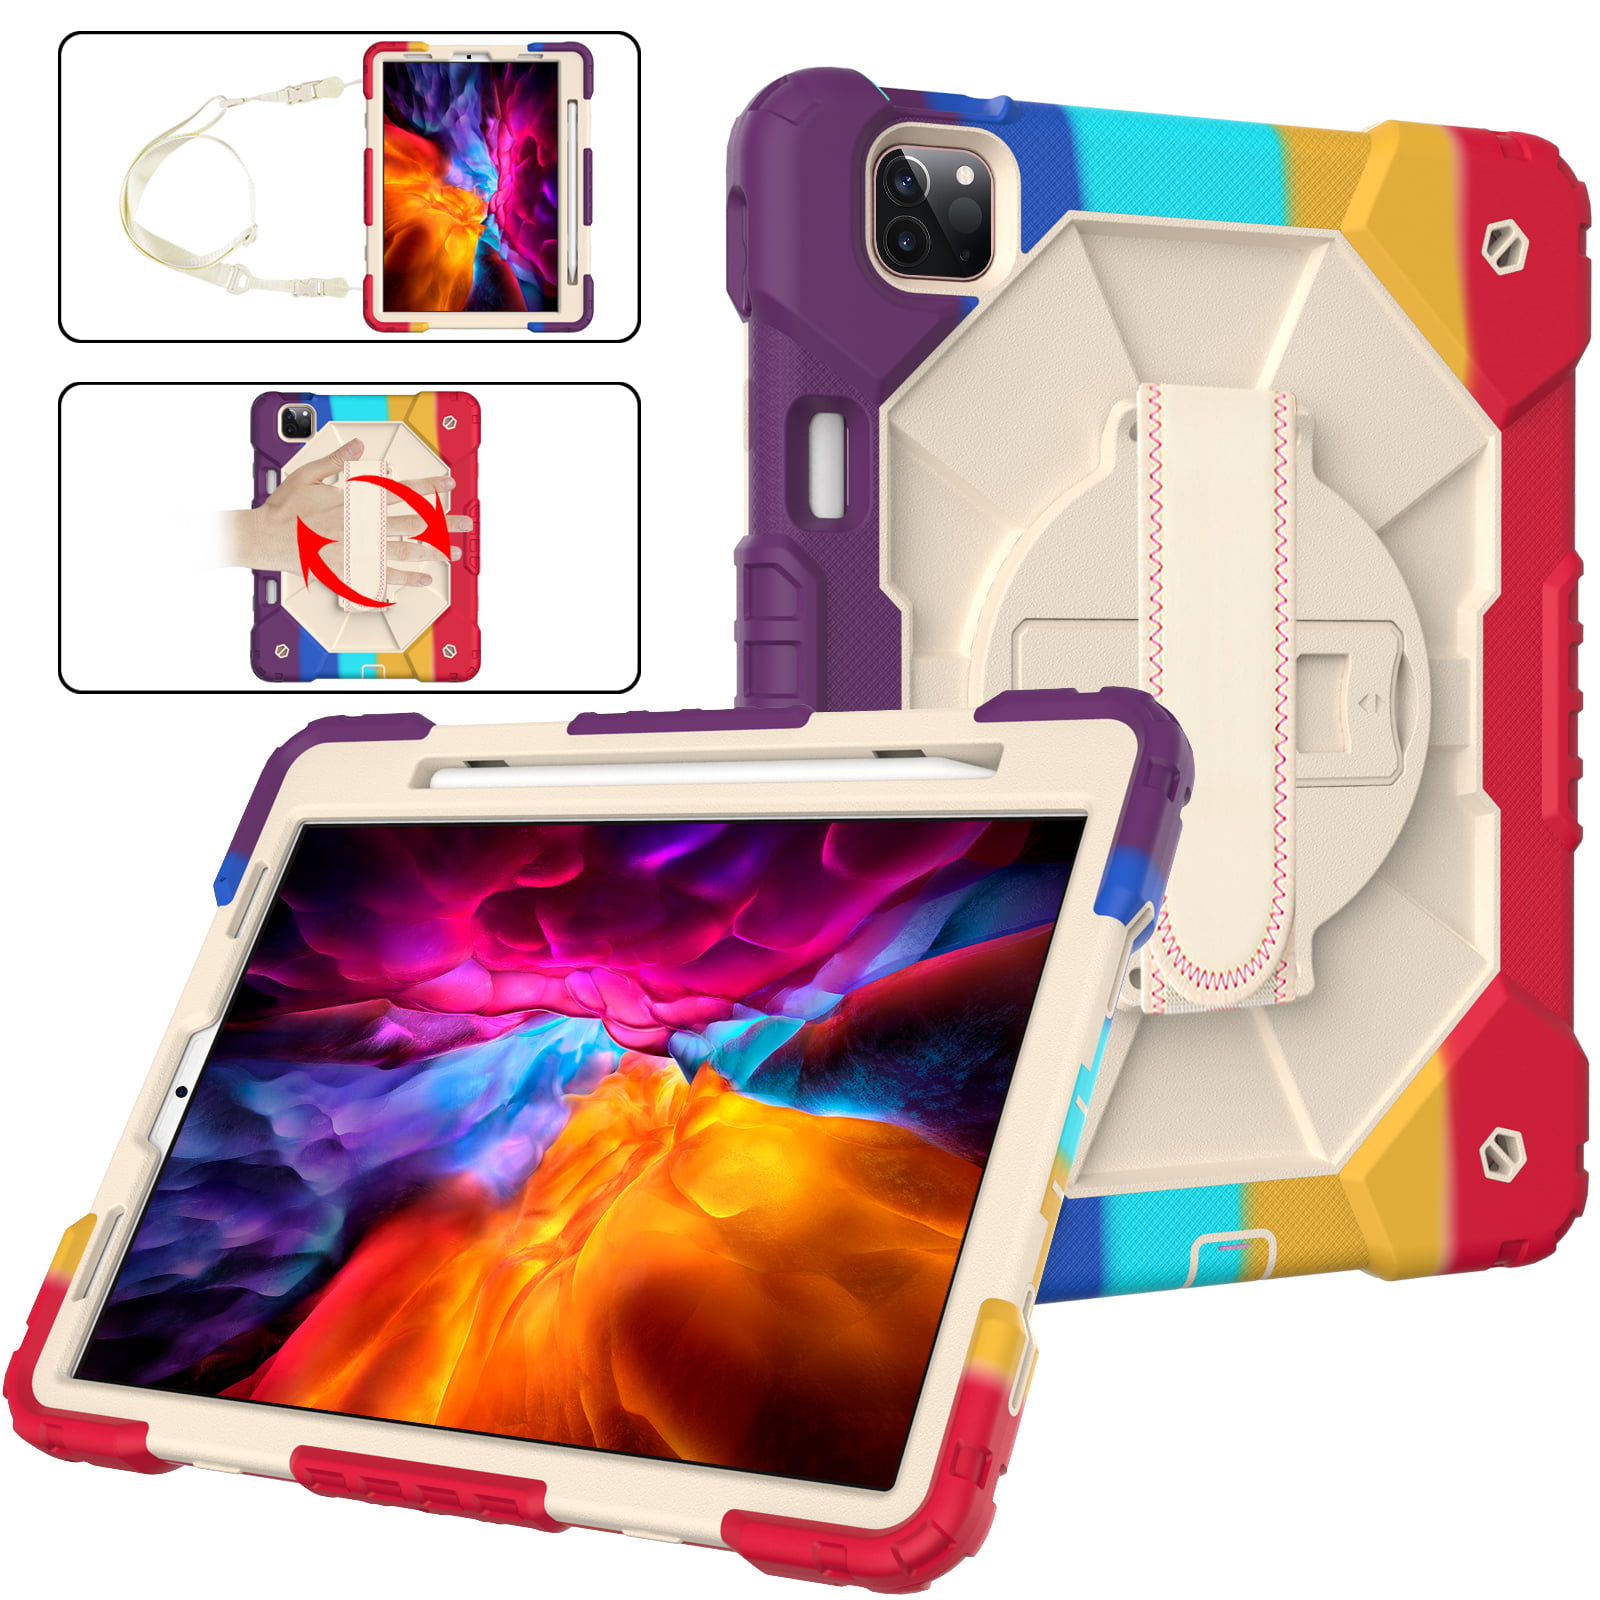 Versterken Immuniseren Maak het zwaar iPad Air 4th Generation Case for Kids,iPad Pro 11 Inch Case,Colorful Cute  Heavy Duty Shockproof Kids Case Rugged Silicone Cover with Pencil Holder  Hand Strap Stand Shoulder Strap,Color Blue - Walmart.com